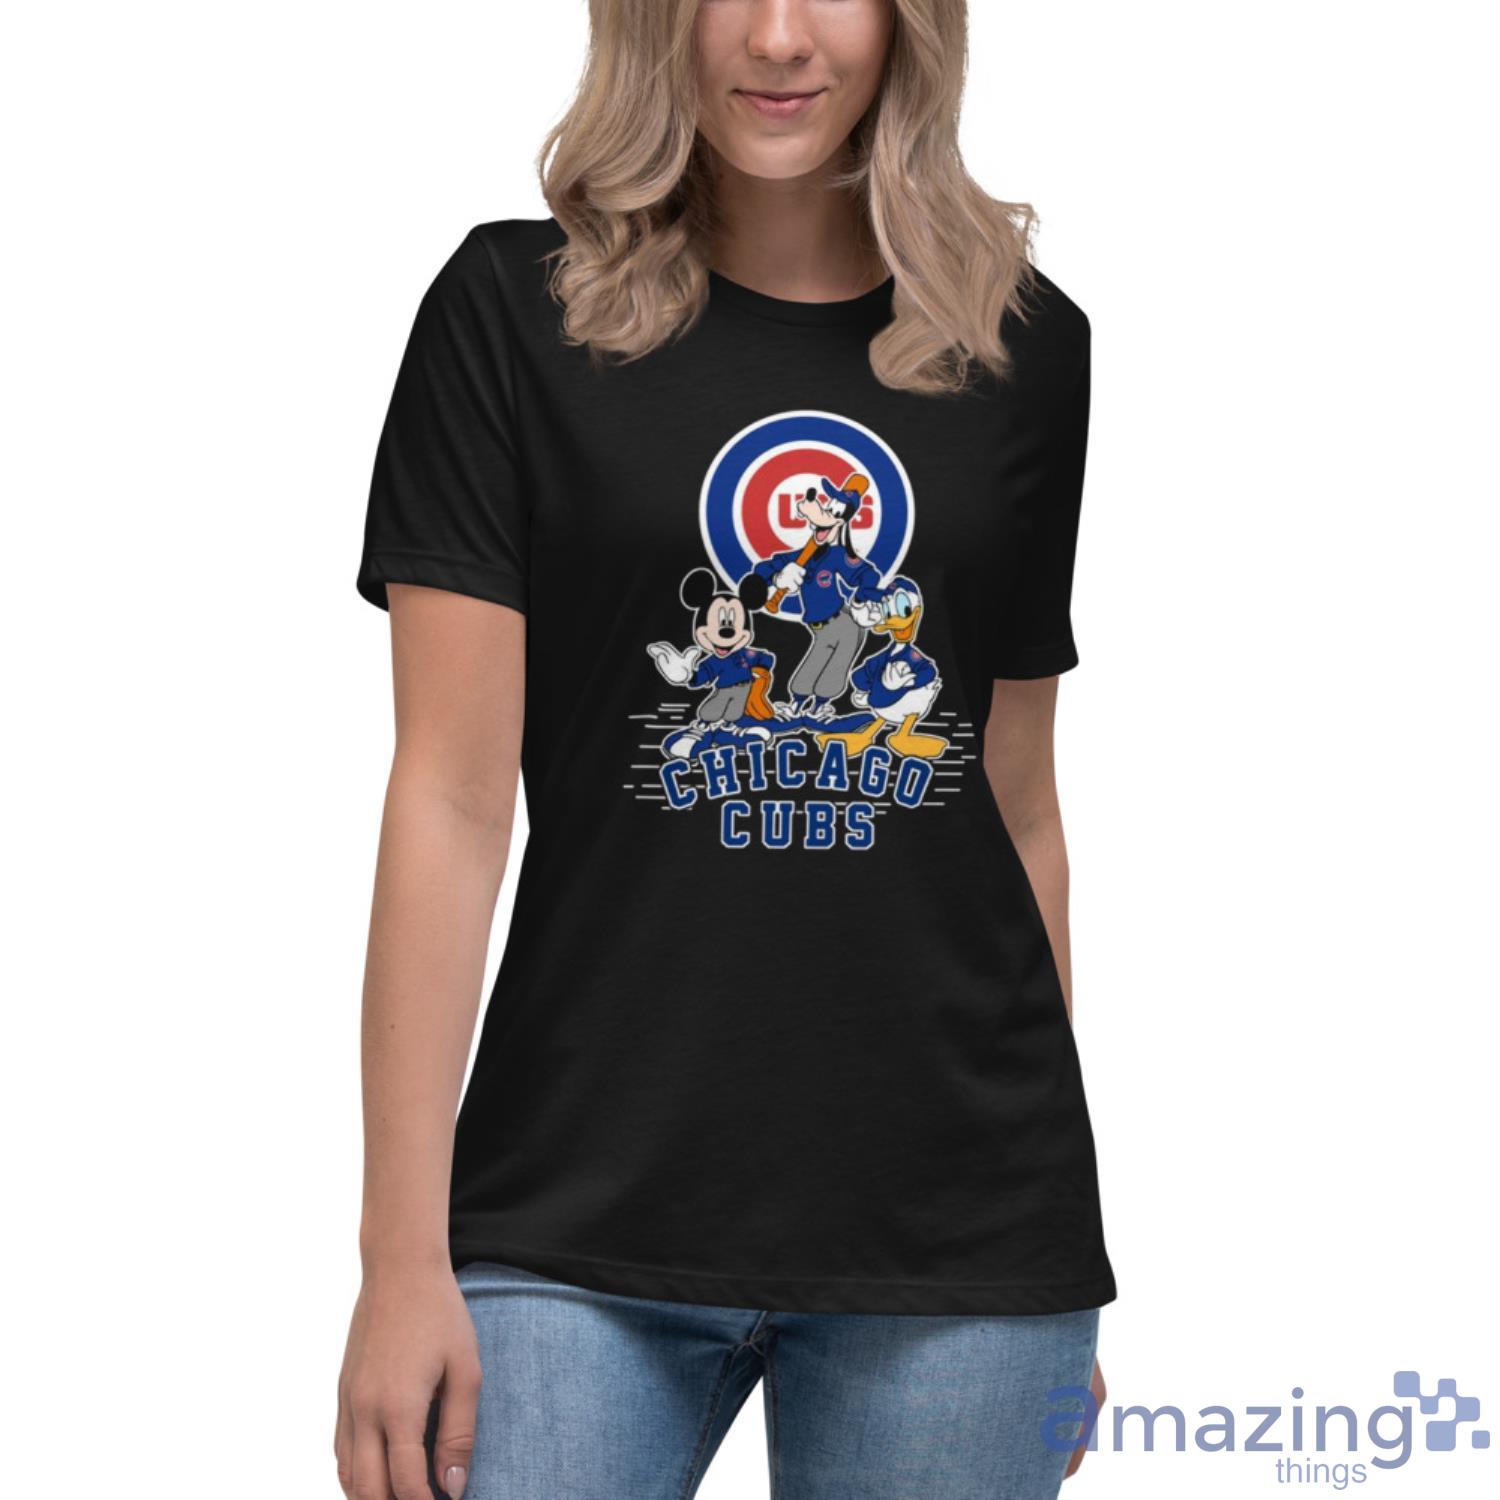 Off-white Mlb Chicago Cubs Cotton Jersey T-shirt In Blue